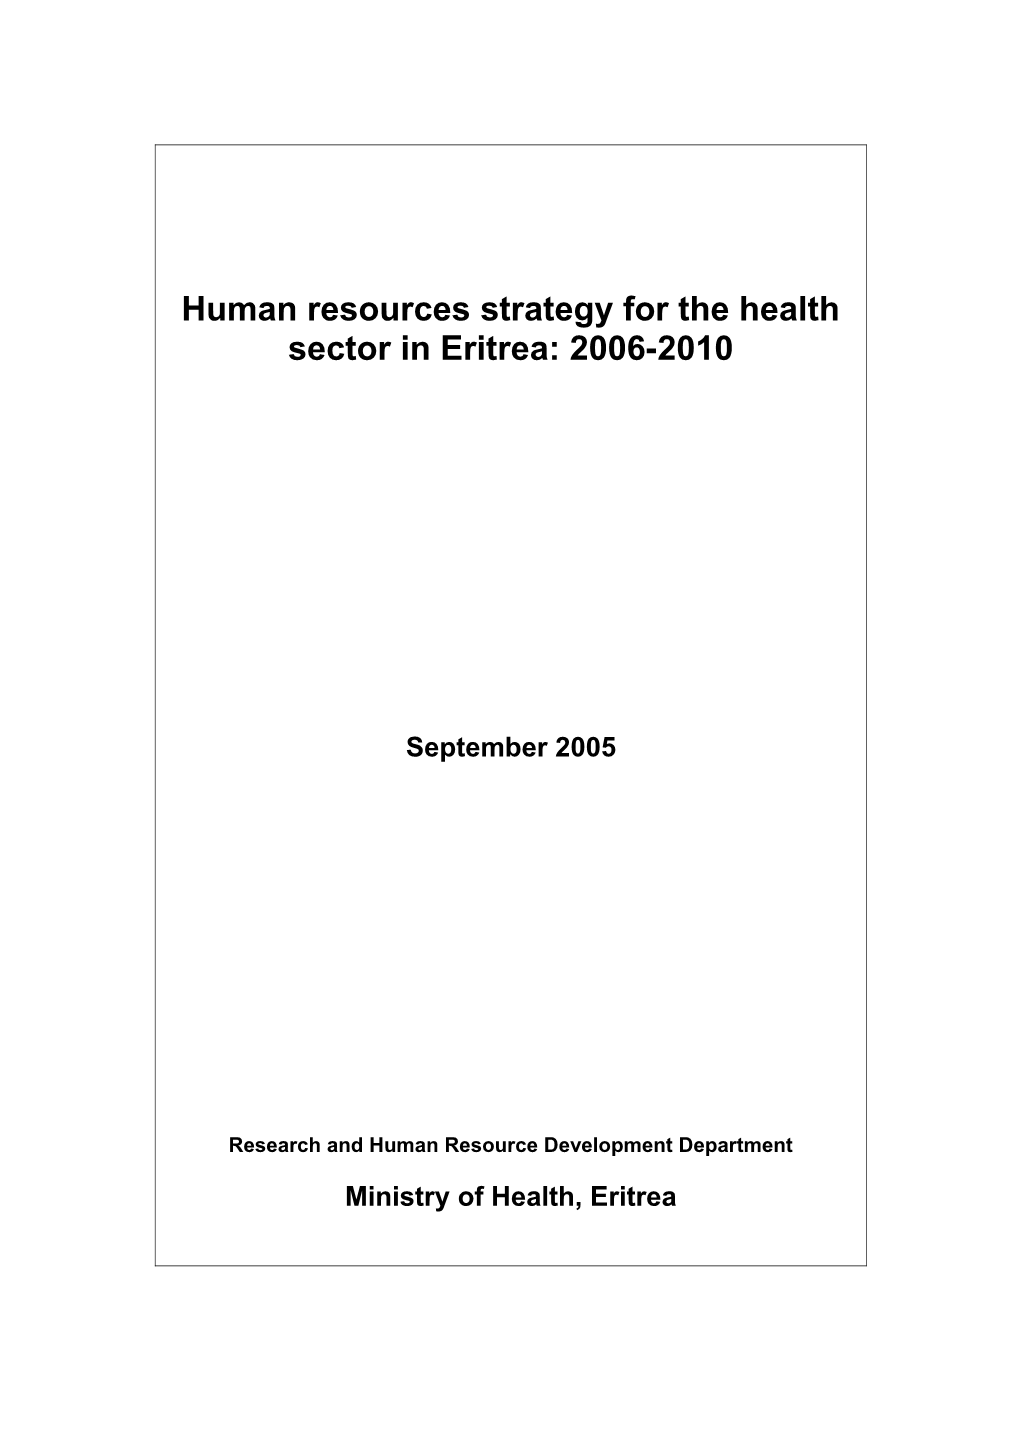 Human Resources Strategy for the Health Sector in Eritrea: 2006-2010